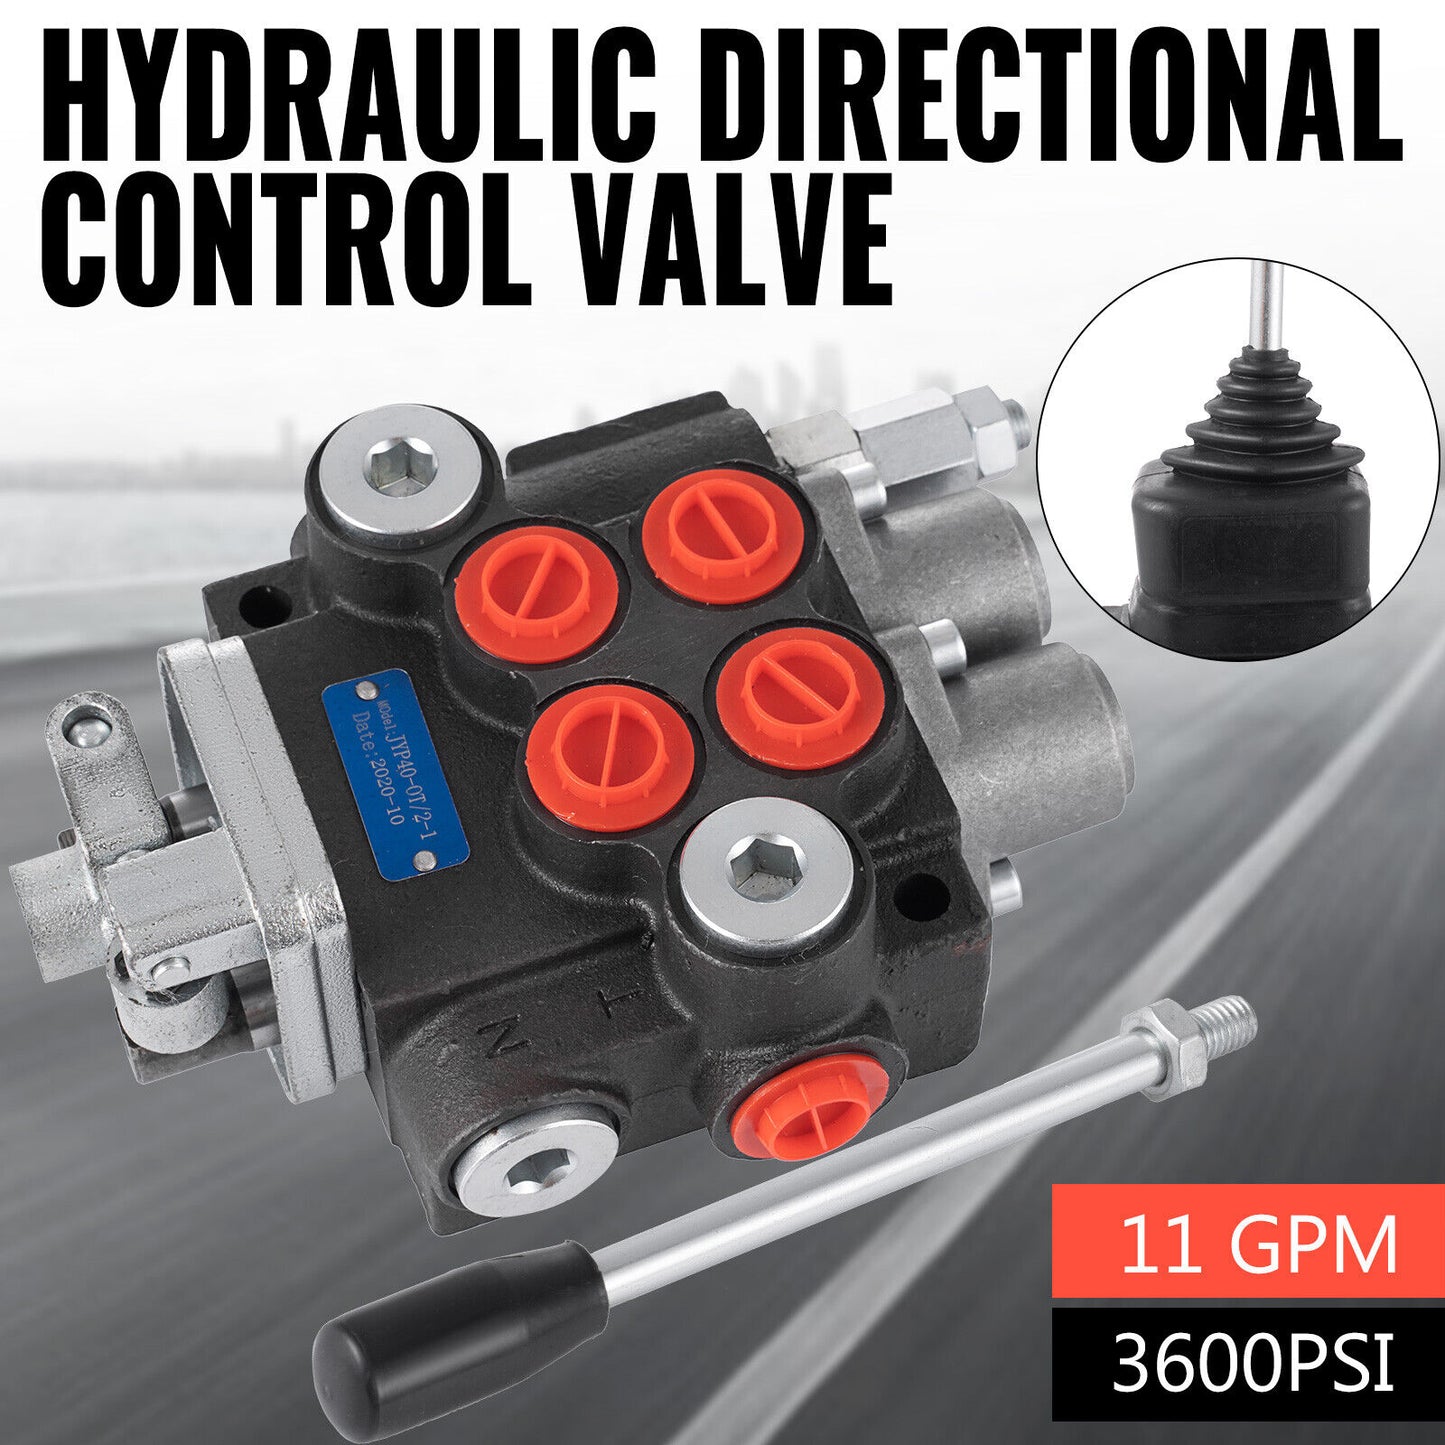 2 Spool 11 GPM Hydraulic Directional Control Valve Tractor Loader w/ Joystick